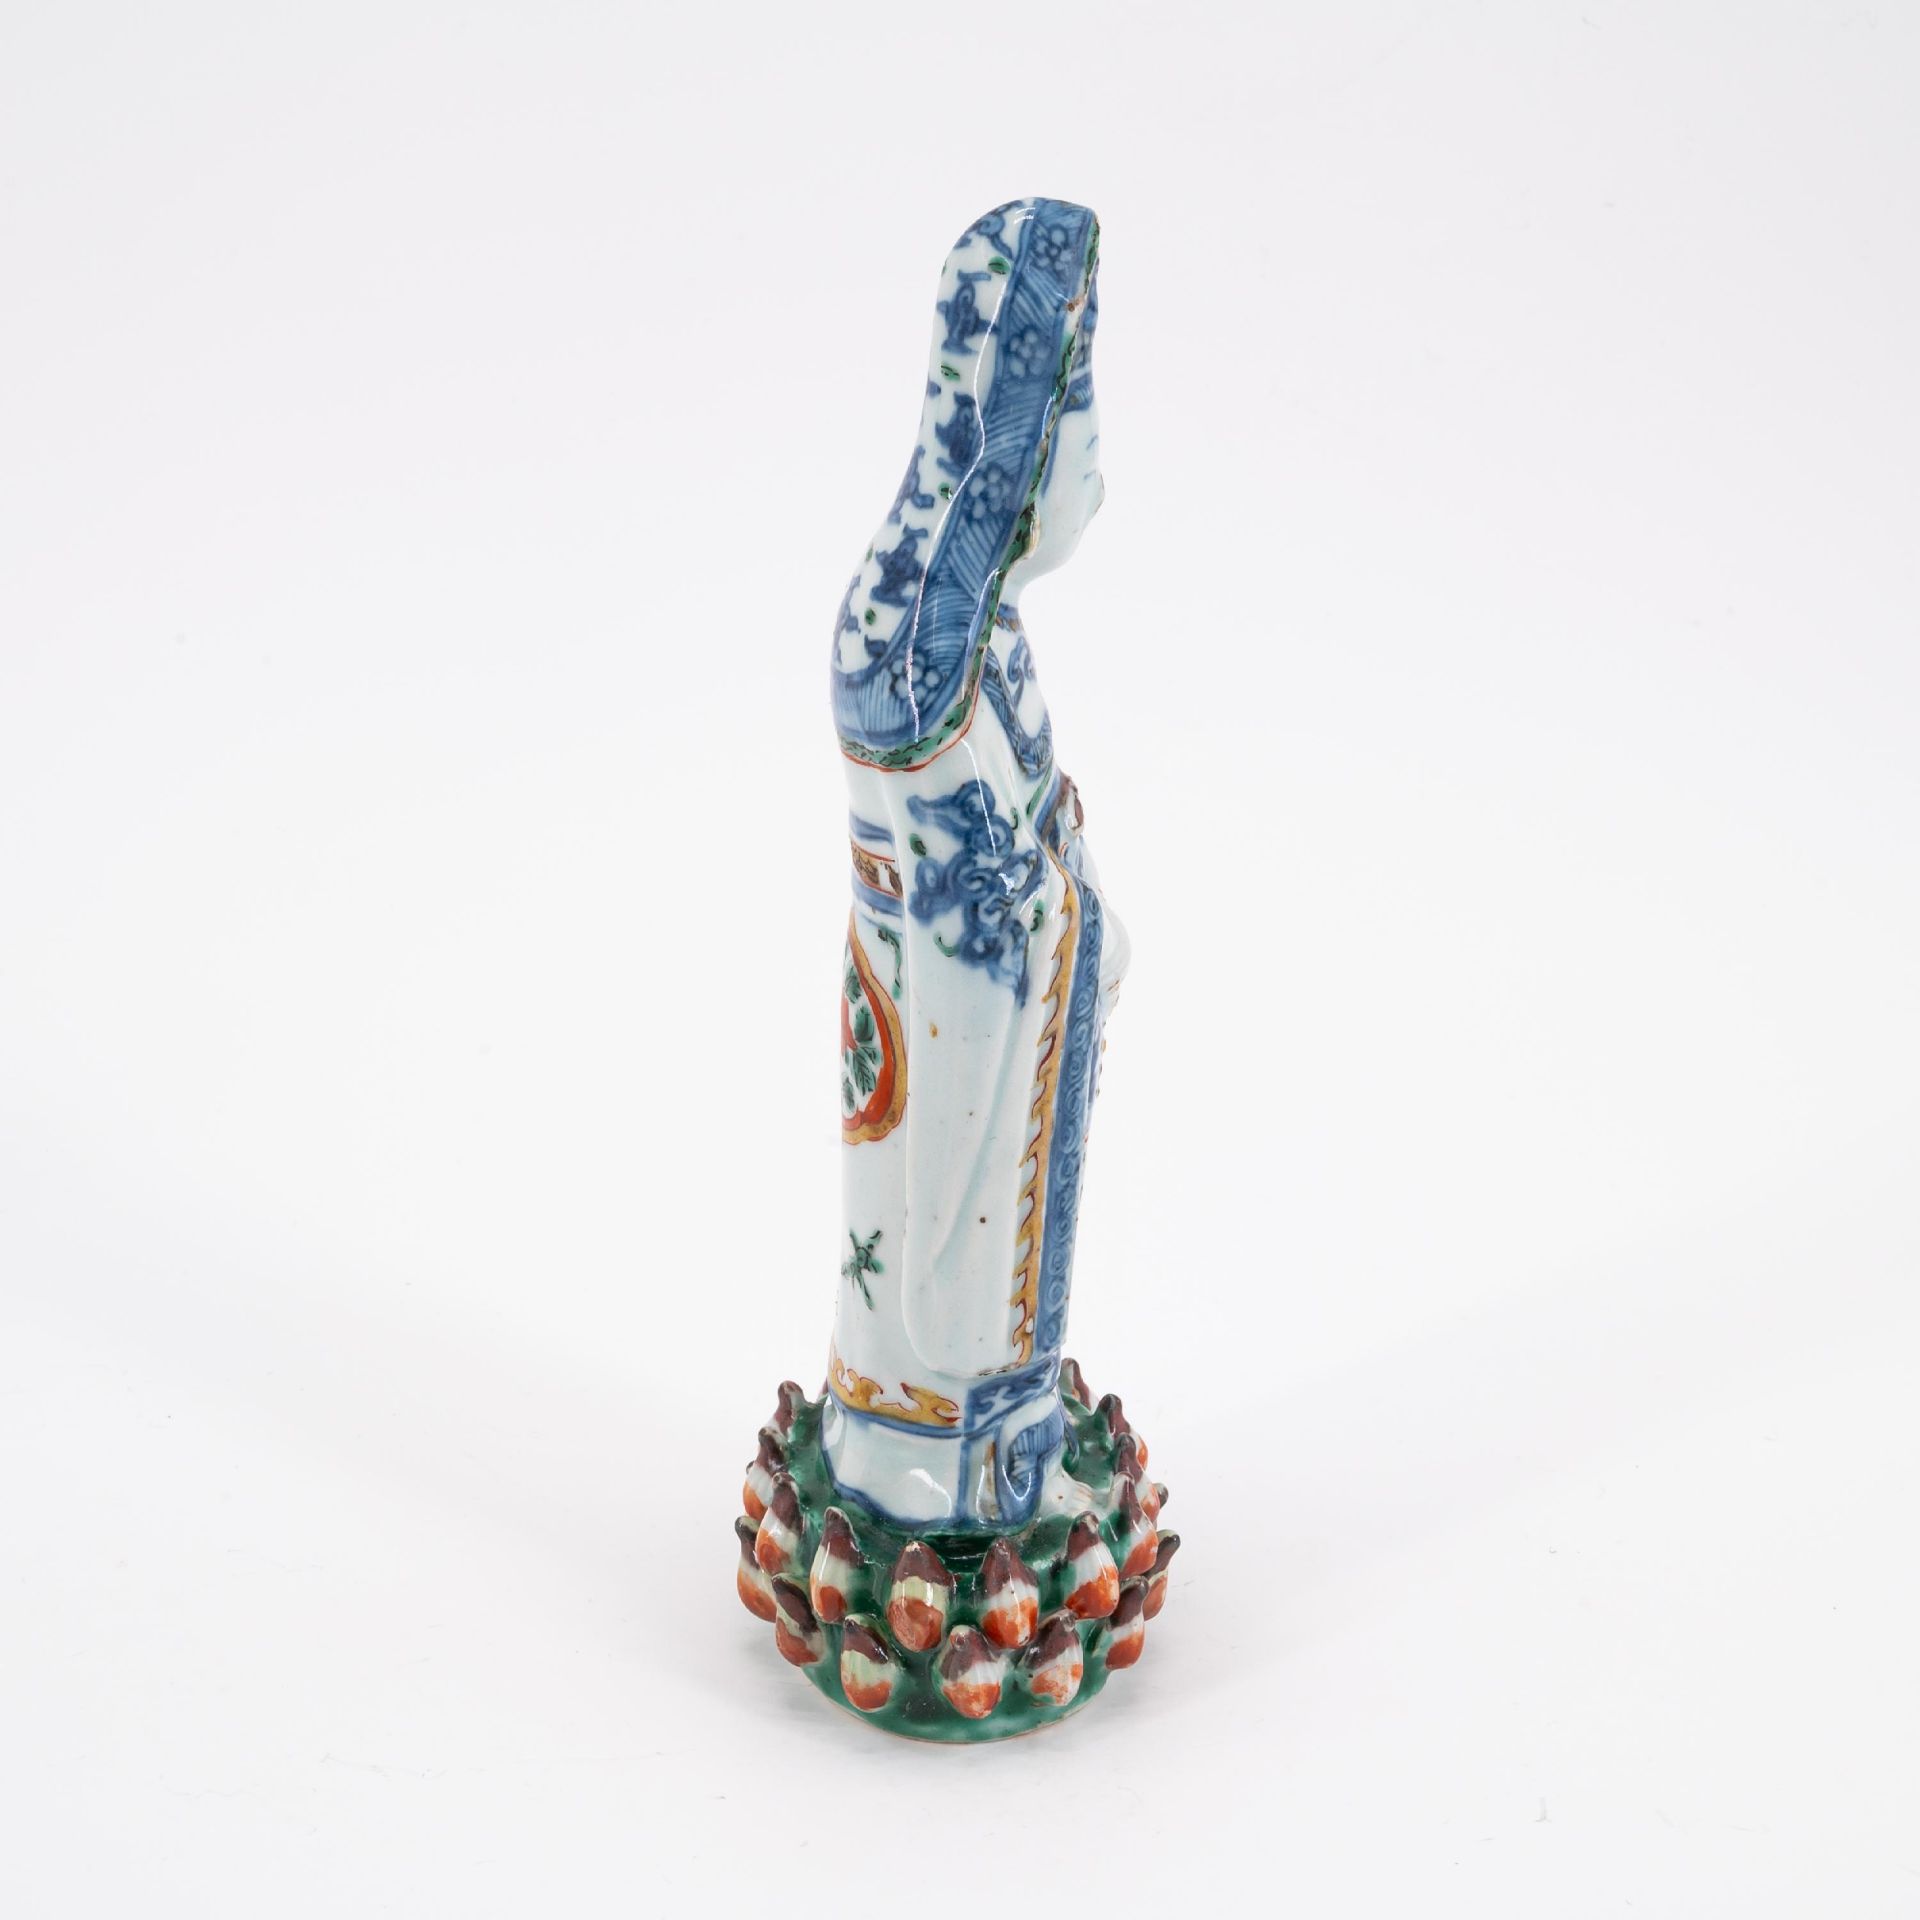 STANDING PORCELAIN GUANYIN - Image 4 of 5